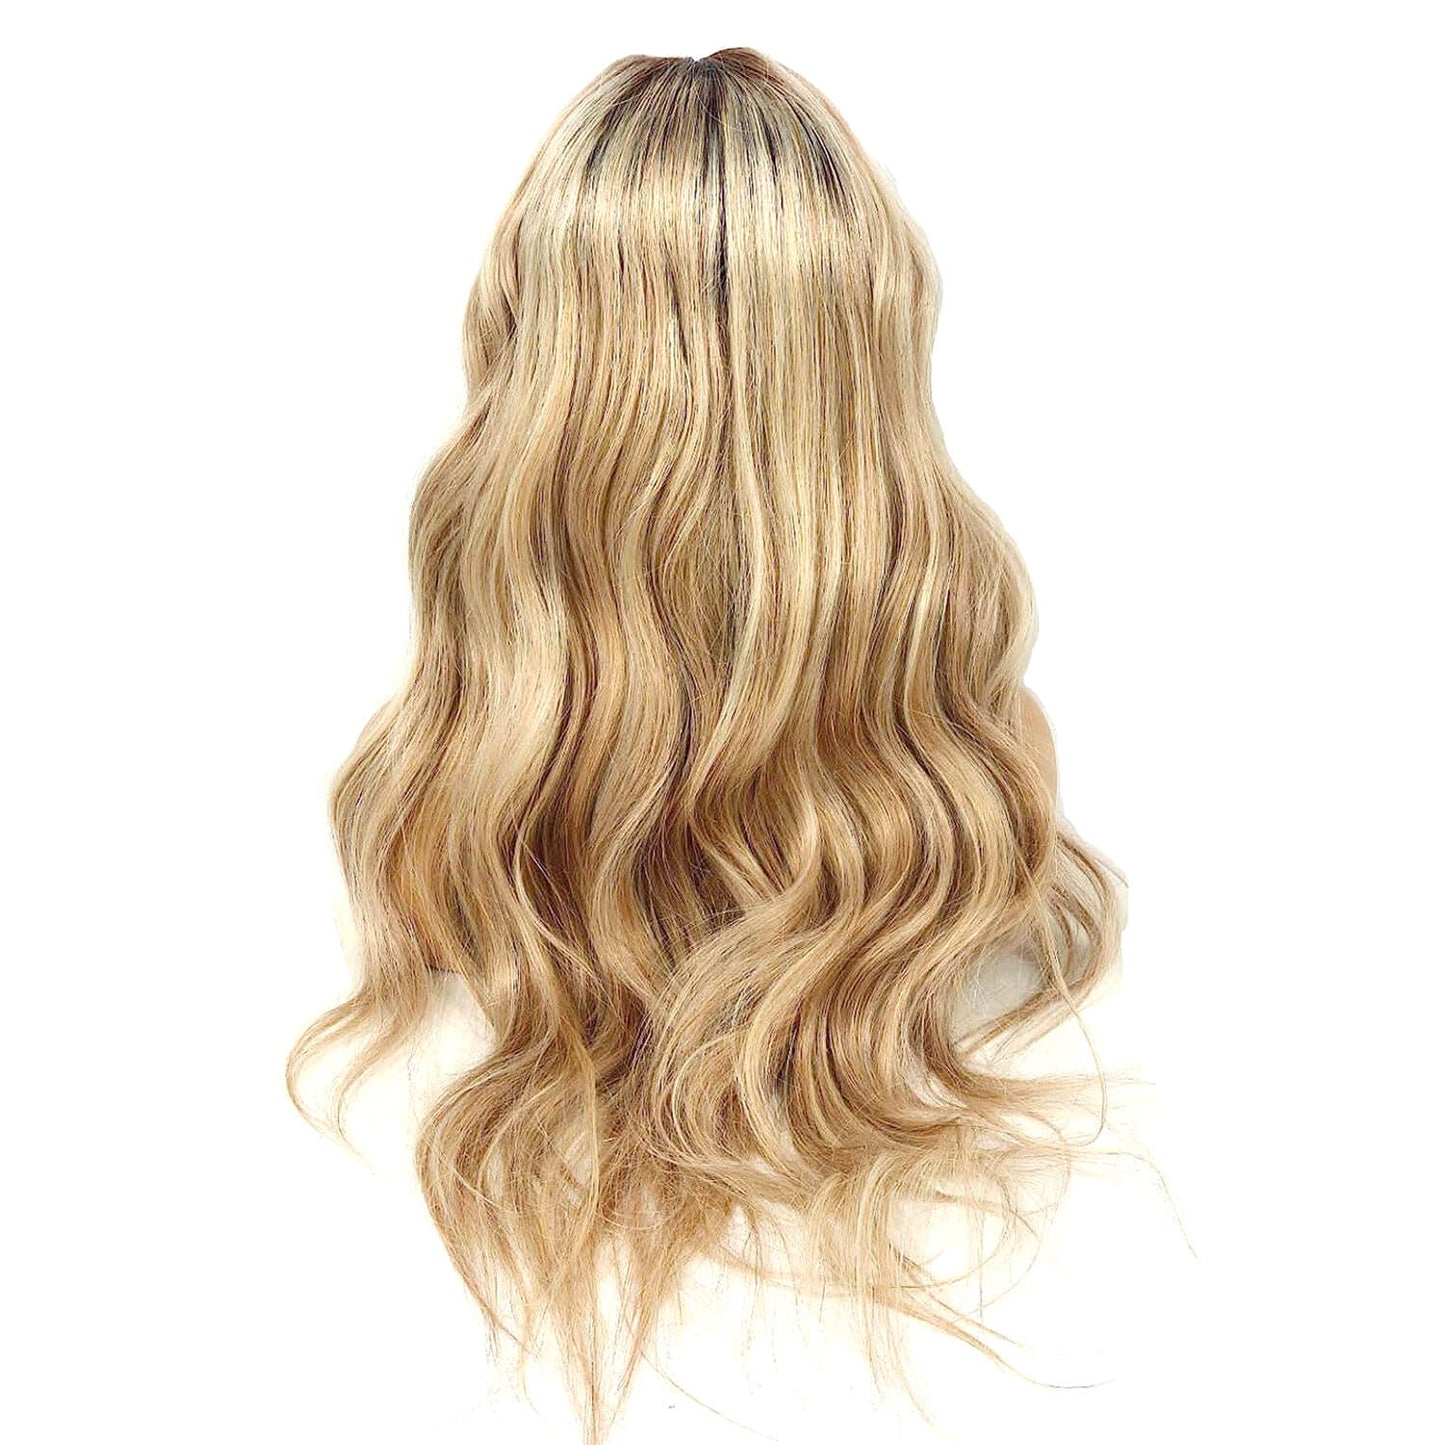 Blonde human hair lace front wig with dark root